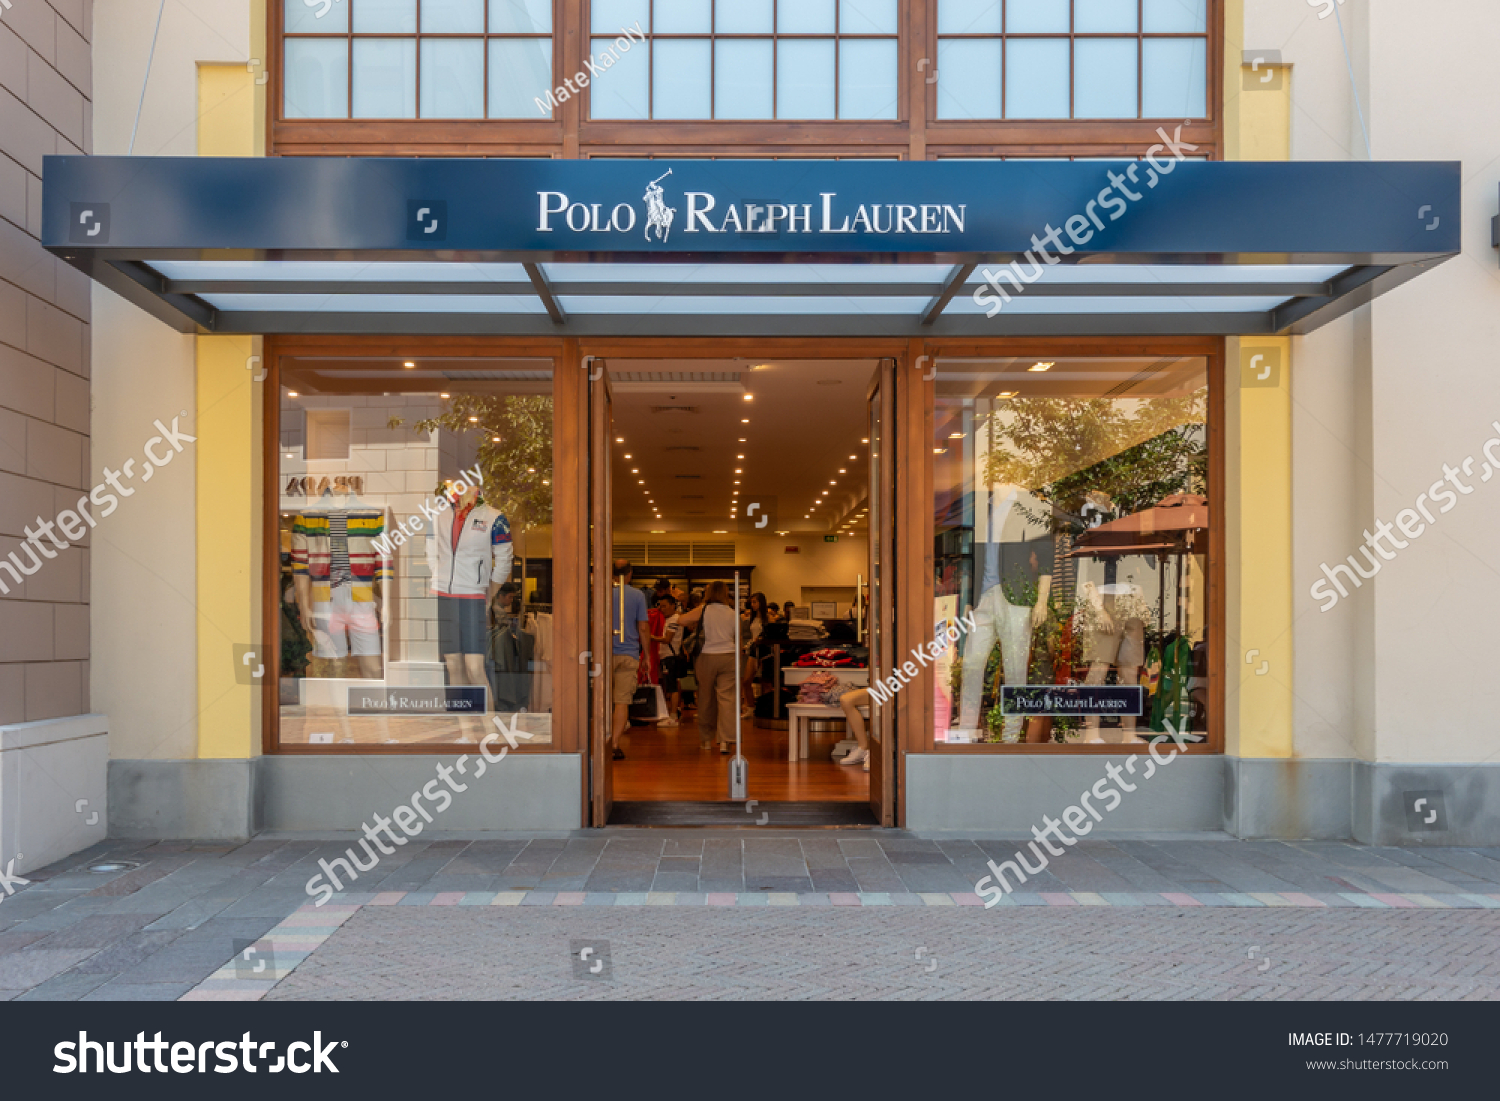 polo ralph lauren clearance store locations